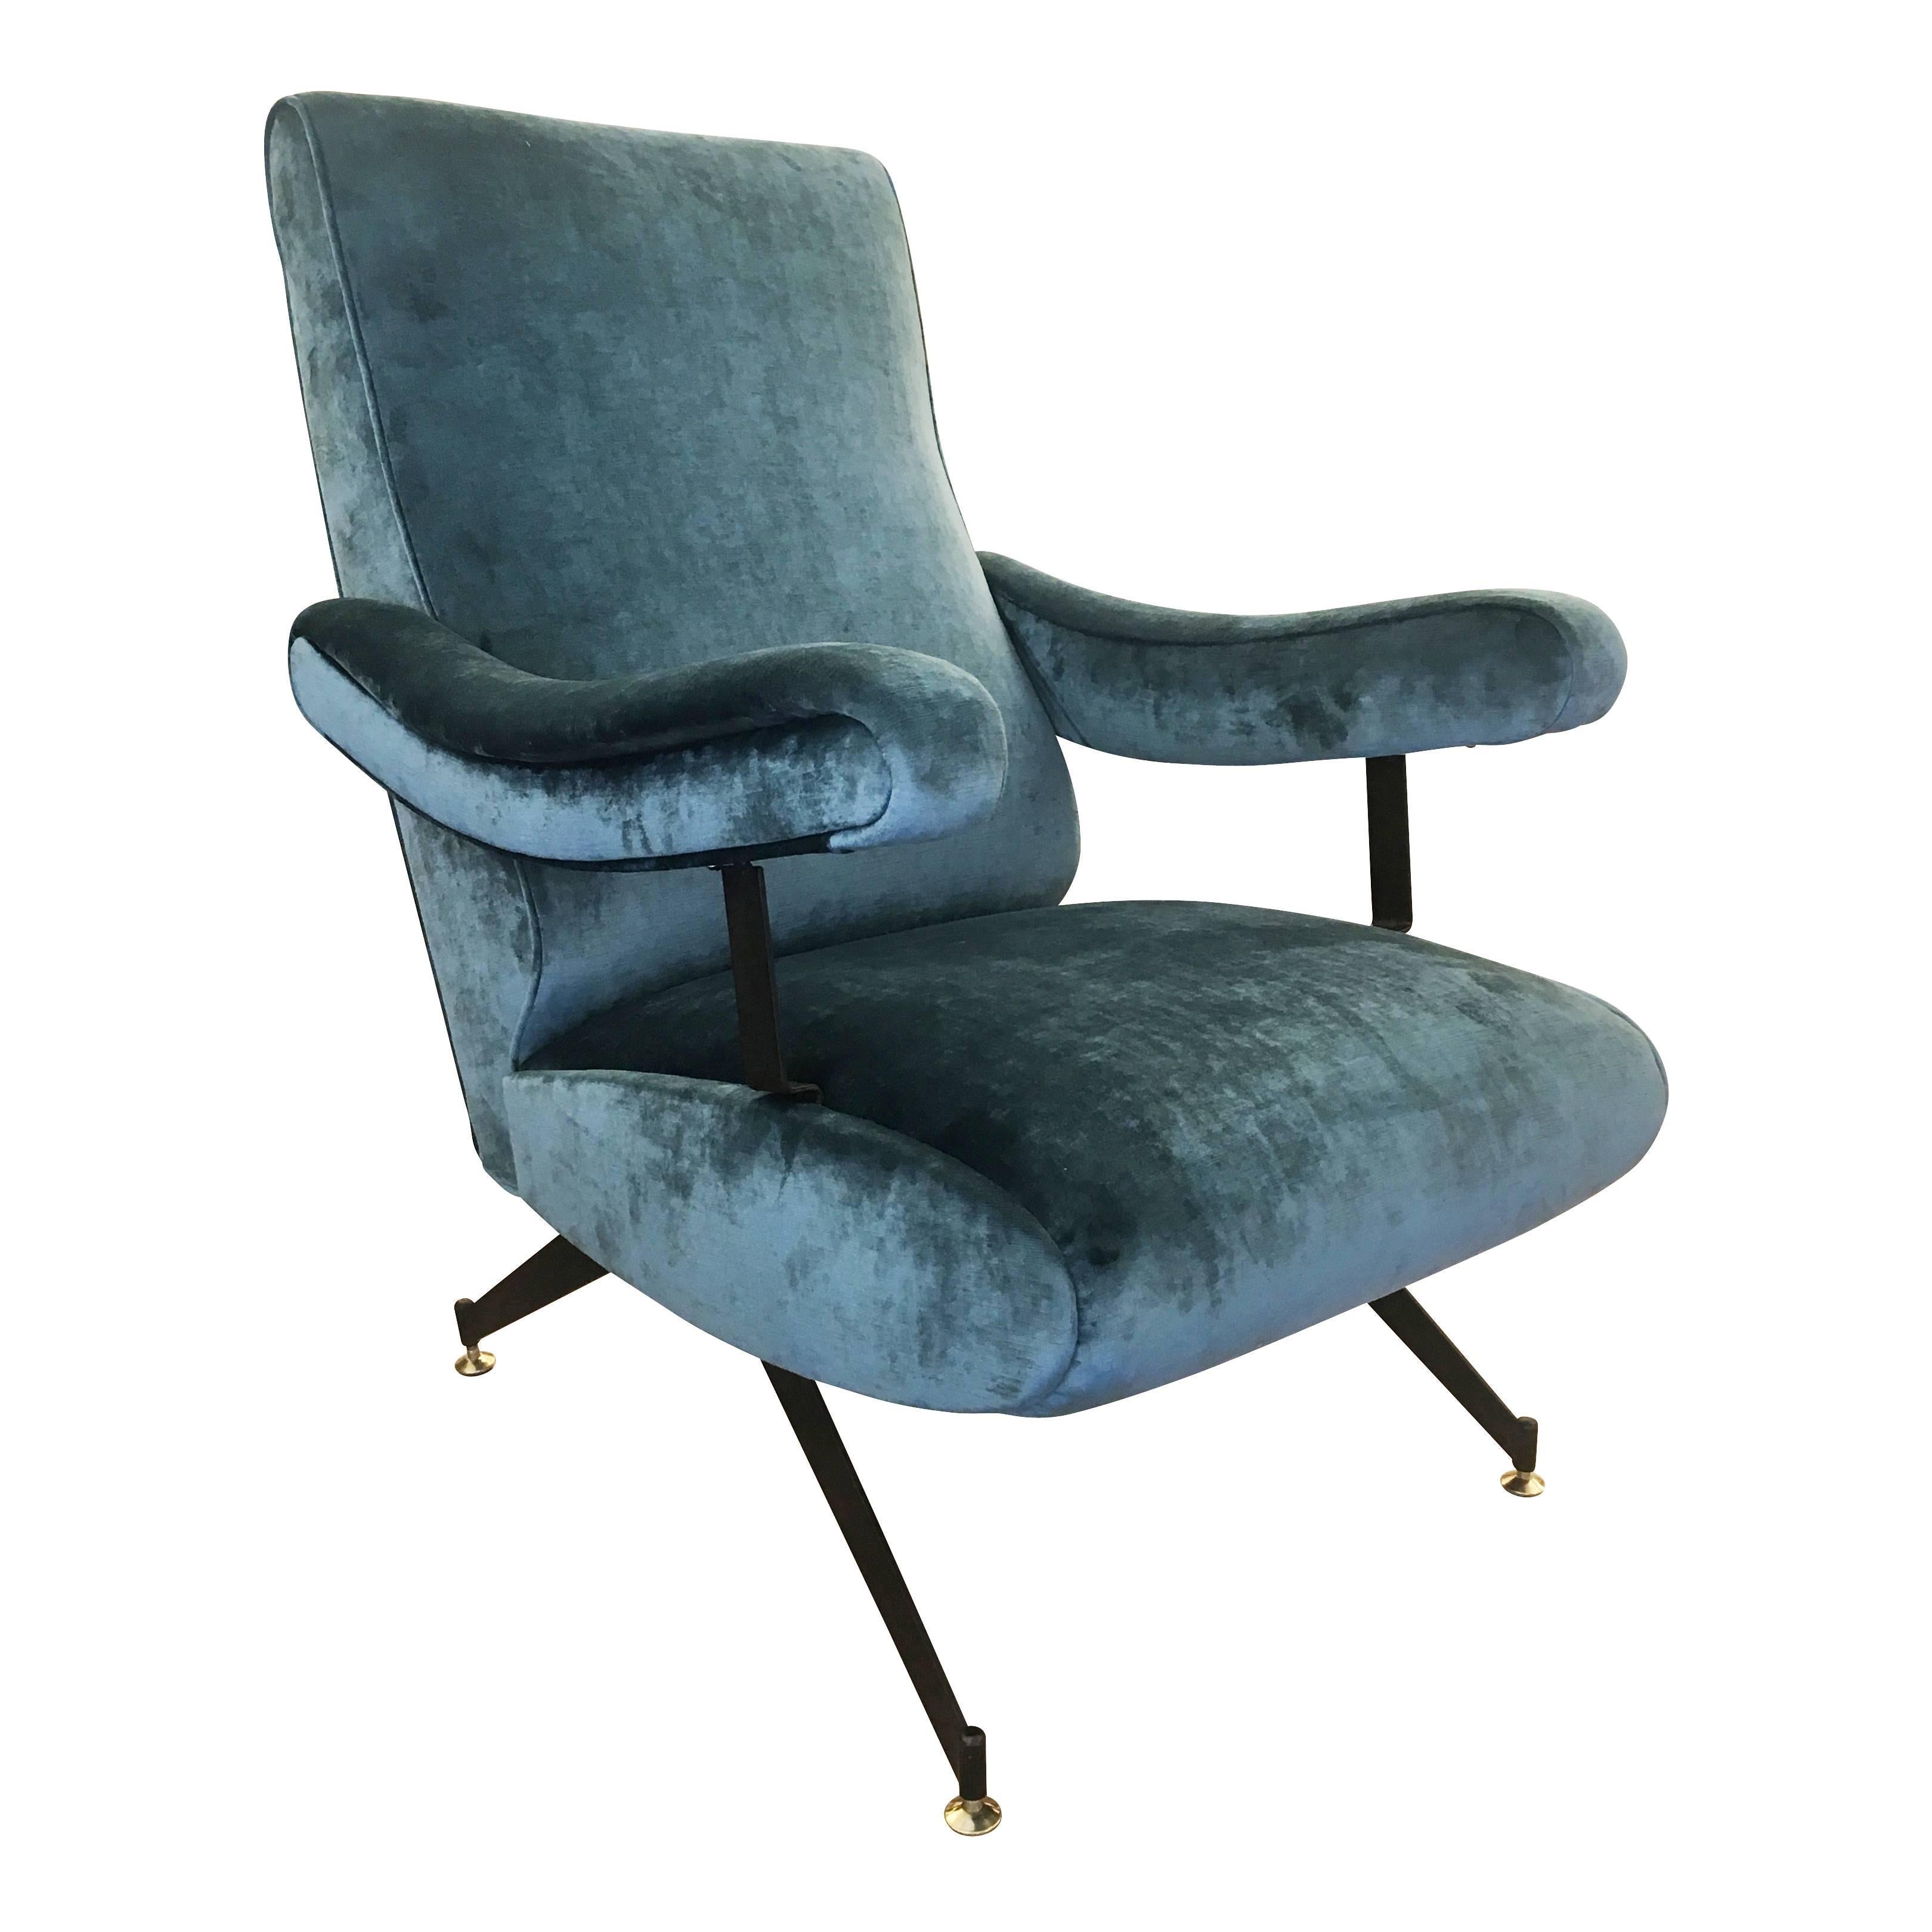 Stylish reclining armchair by Gianni Moscatelli for Formanova. The legs are black lacquered metal with brass feet. Has been re-upholstered in a green velvet.
